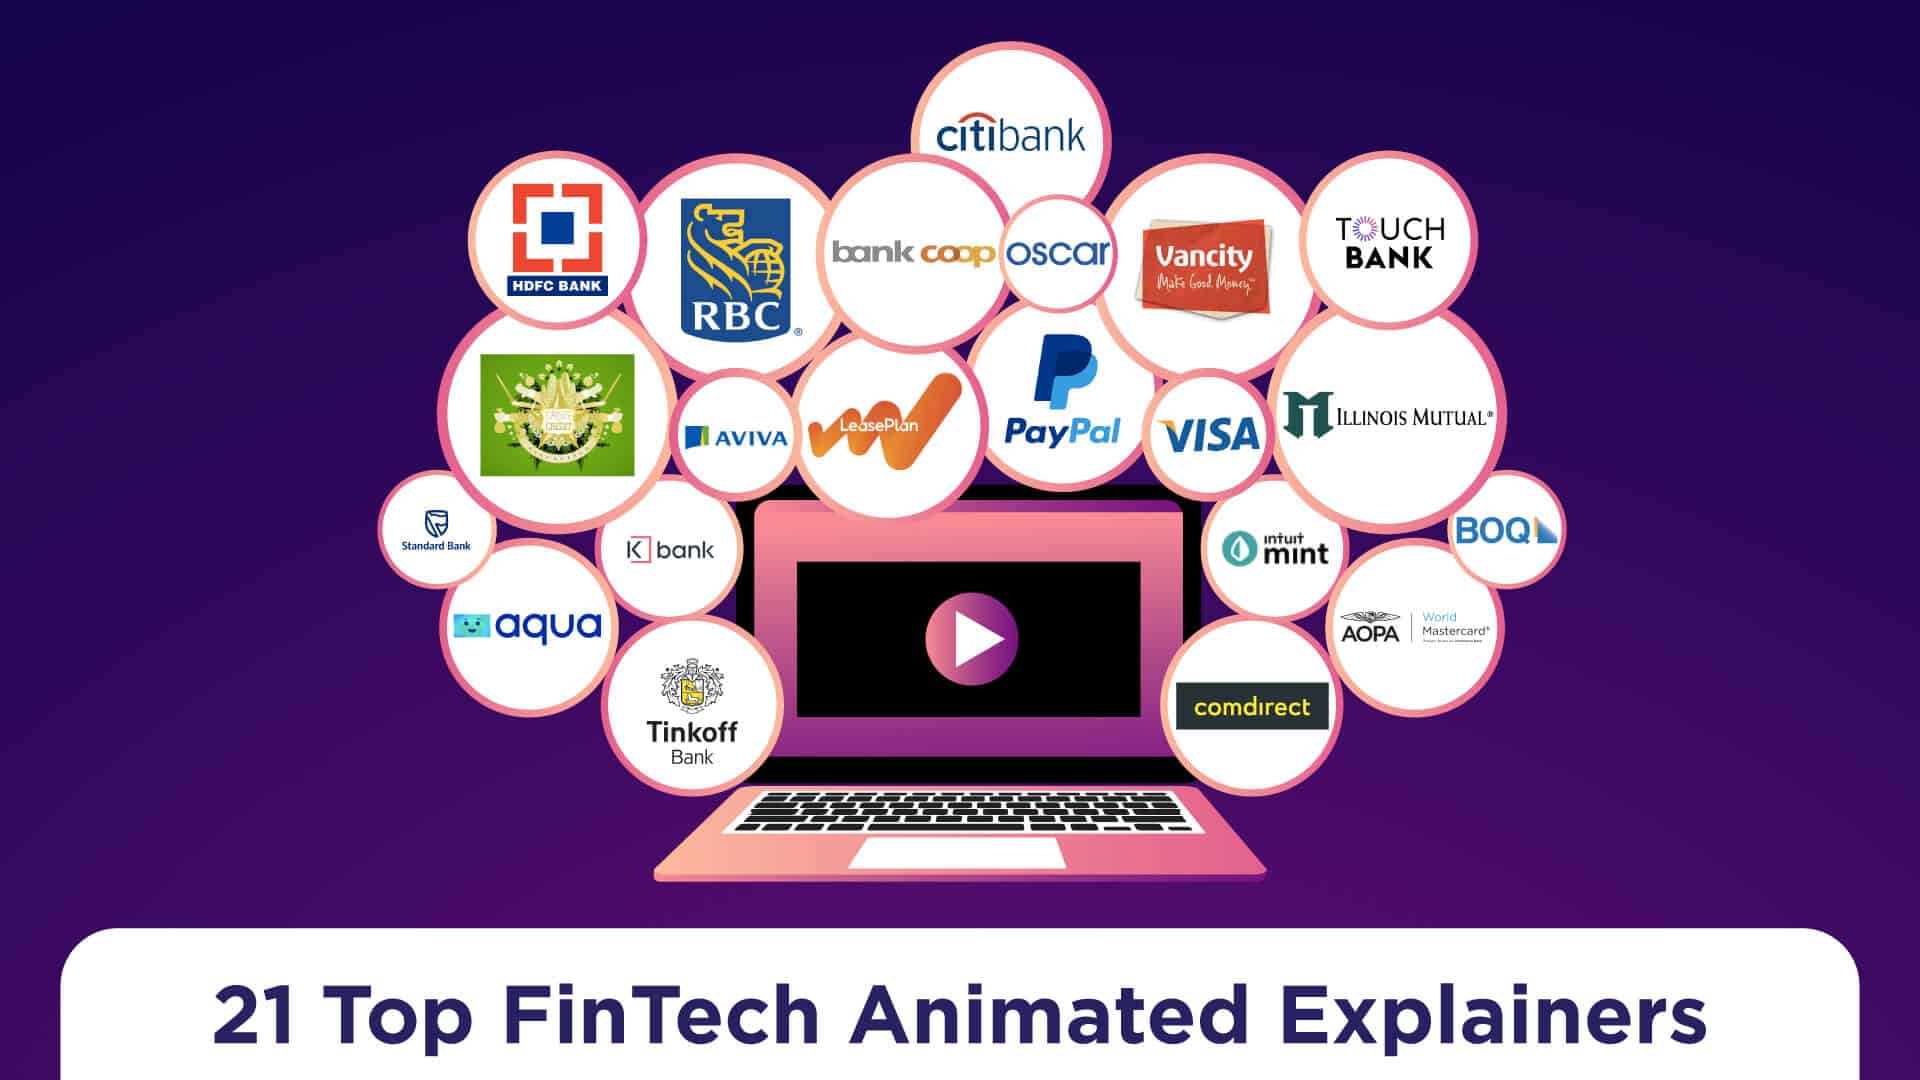 21 Top FinTech Animated Explainers 2020 update